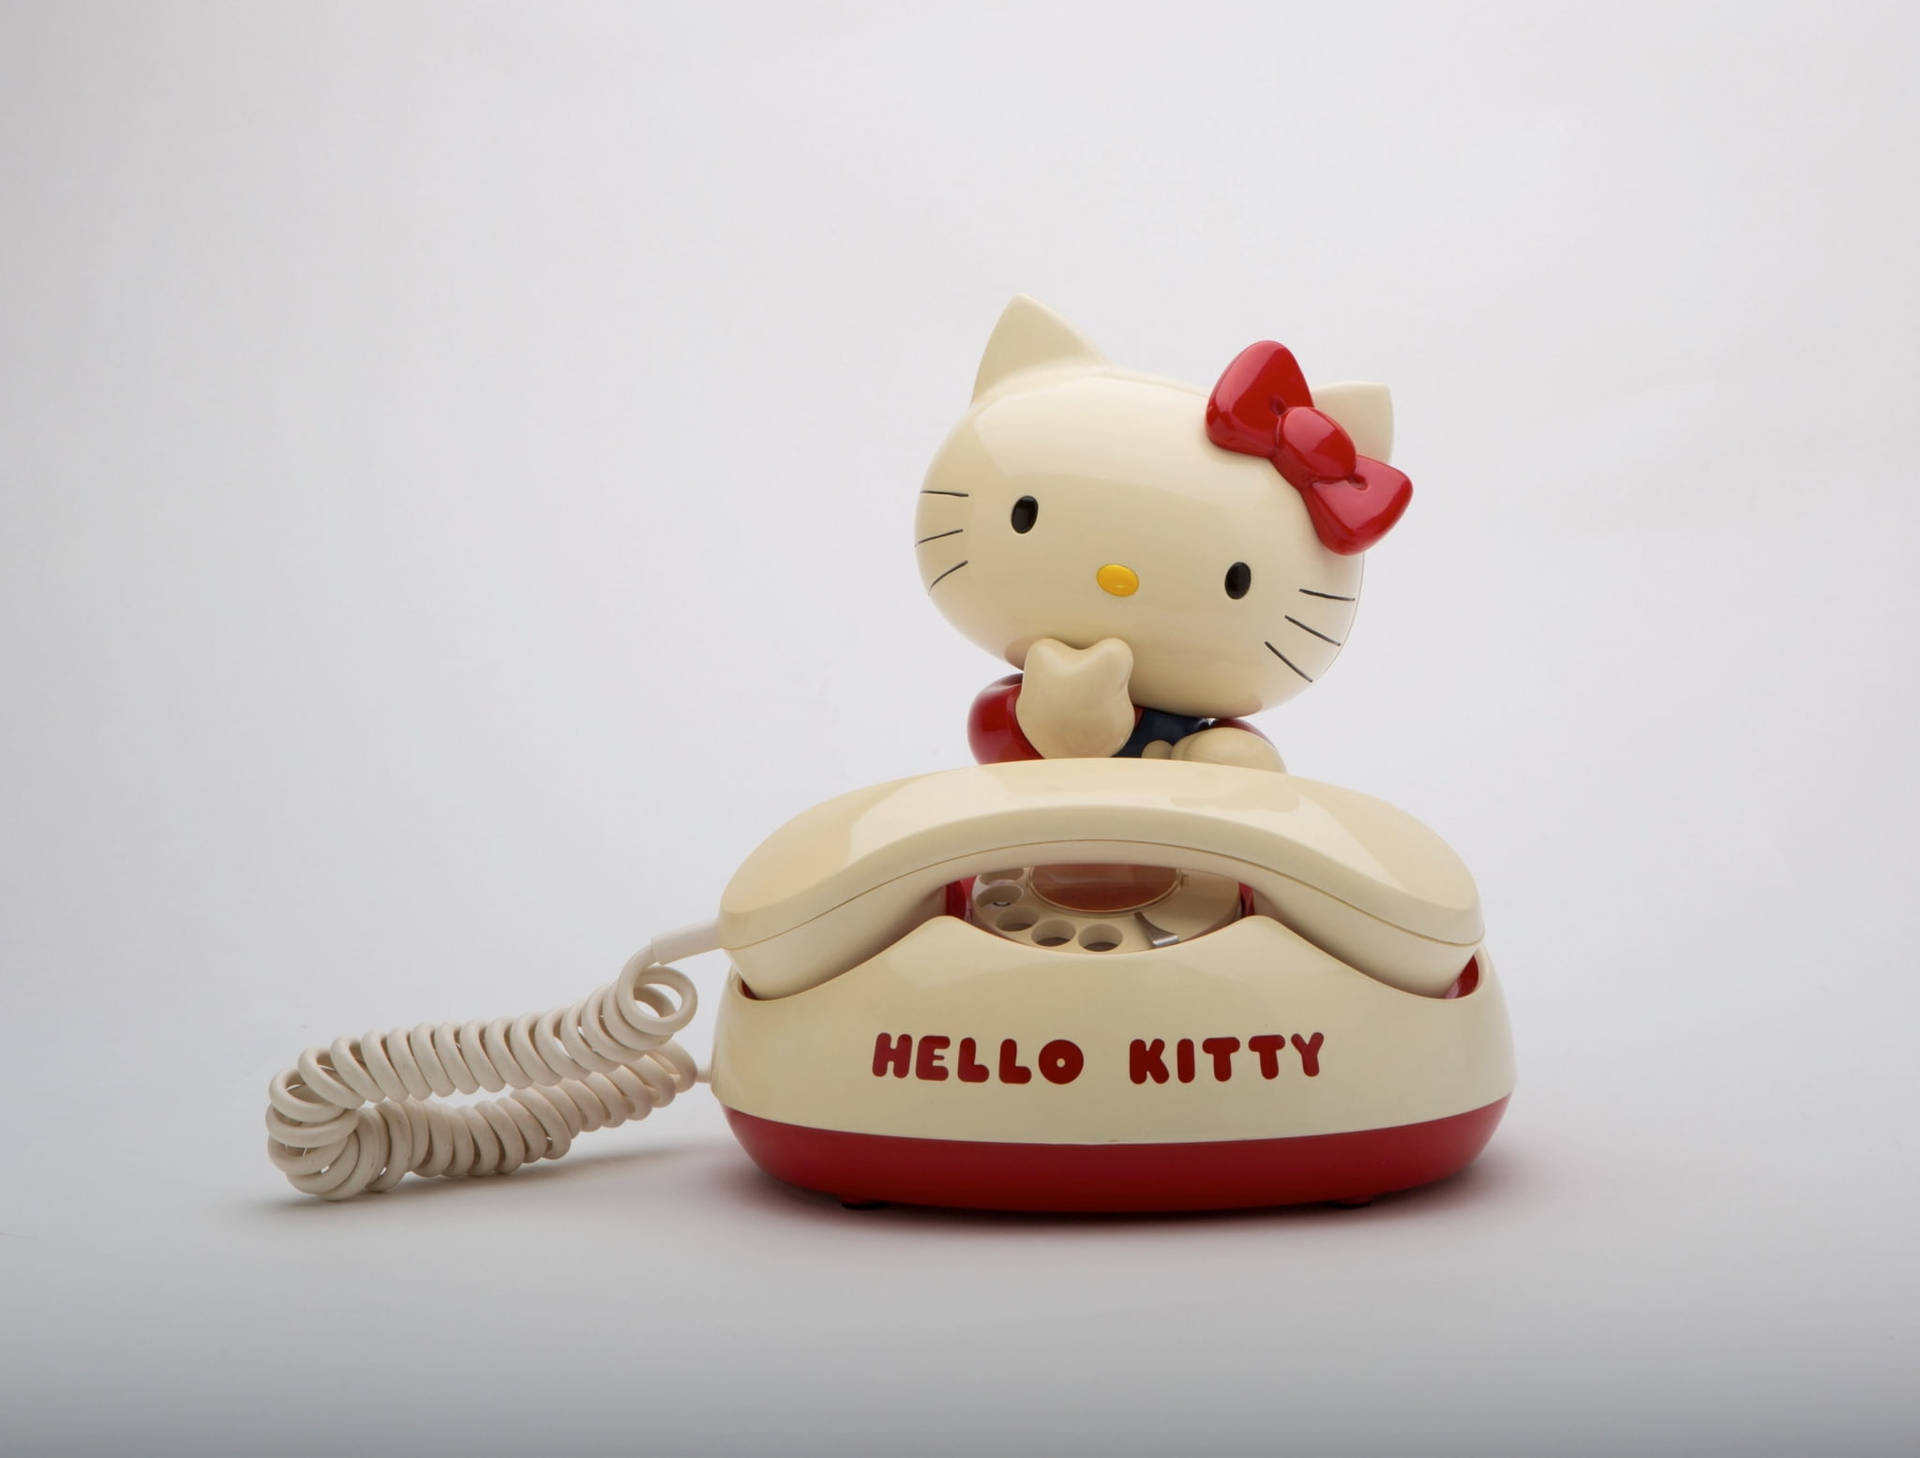 Caption: Interactive Hello Kitty at Desk with Telephone Wallpaper Wallpaper